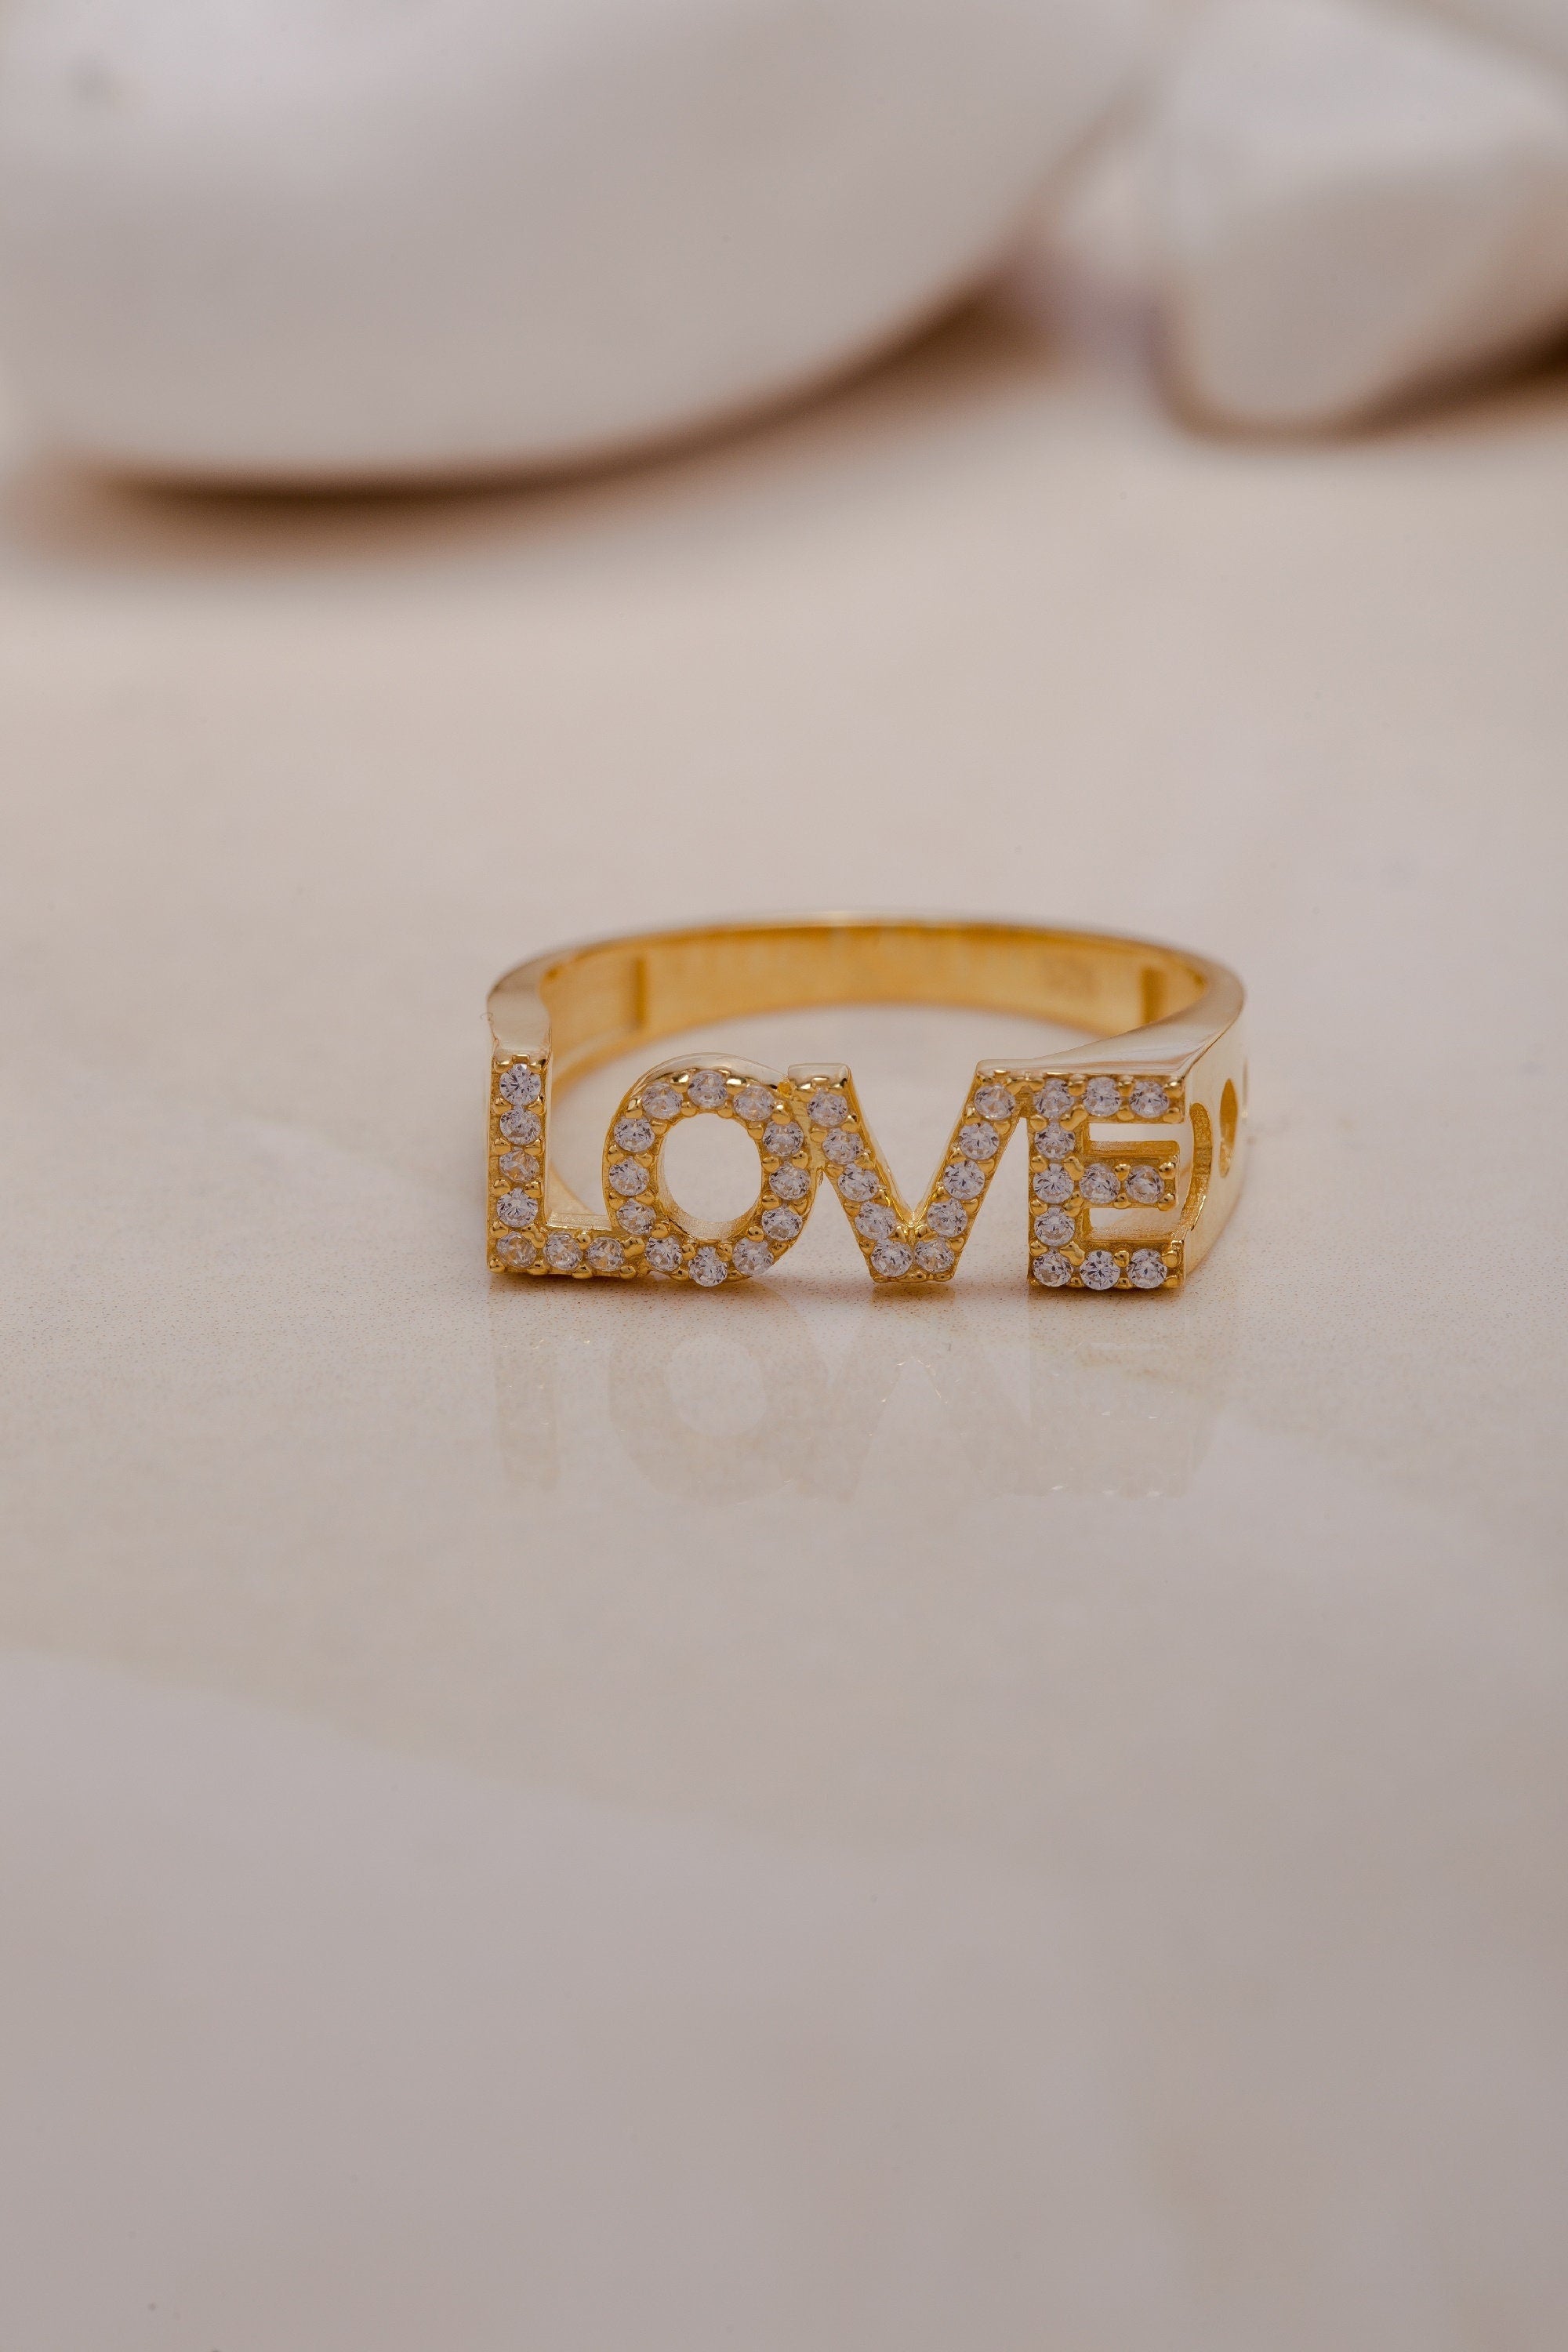 14K Solid Gold Love Ring, 925 Sterling Womens Silver Ring, Dainty Love Ring, Zircon Stone Love Ring, Script Love Ring, Gift for Women